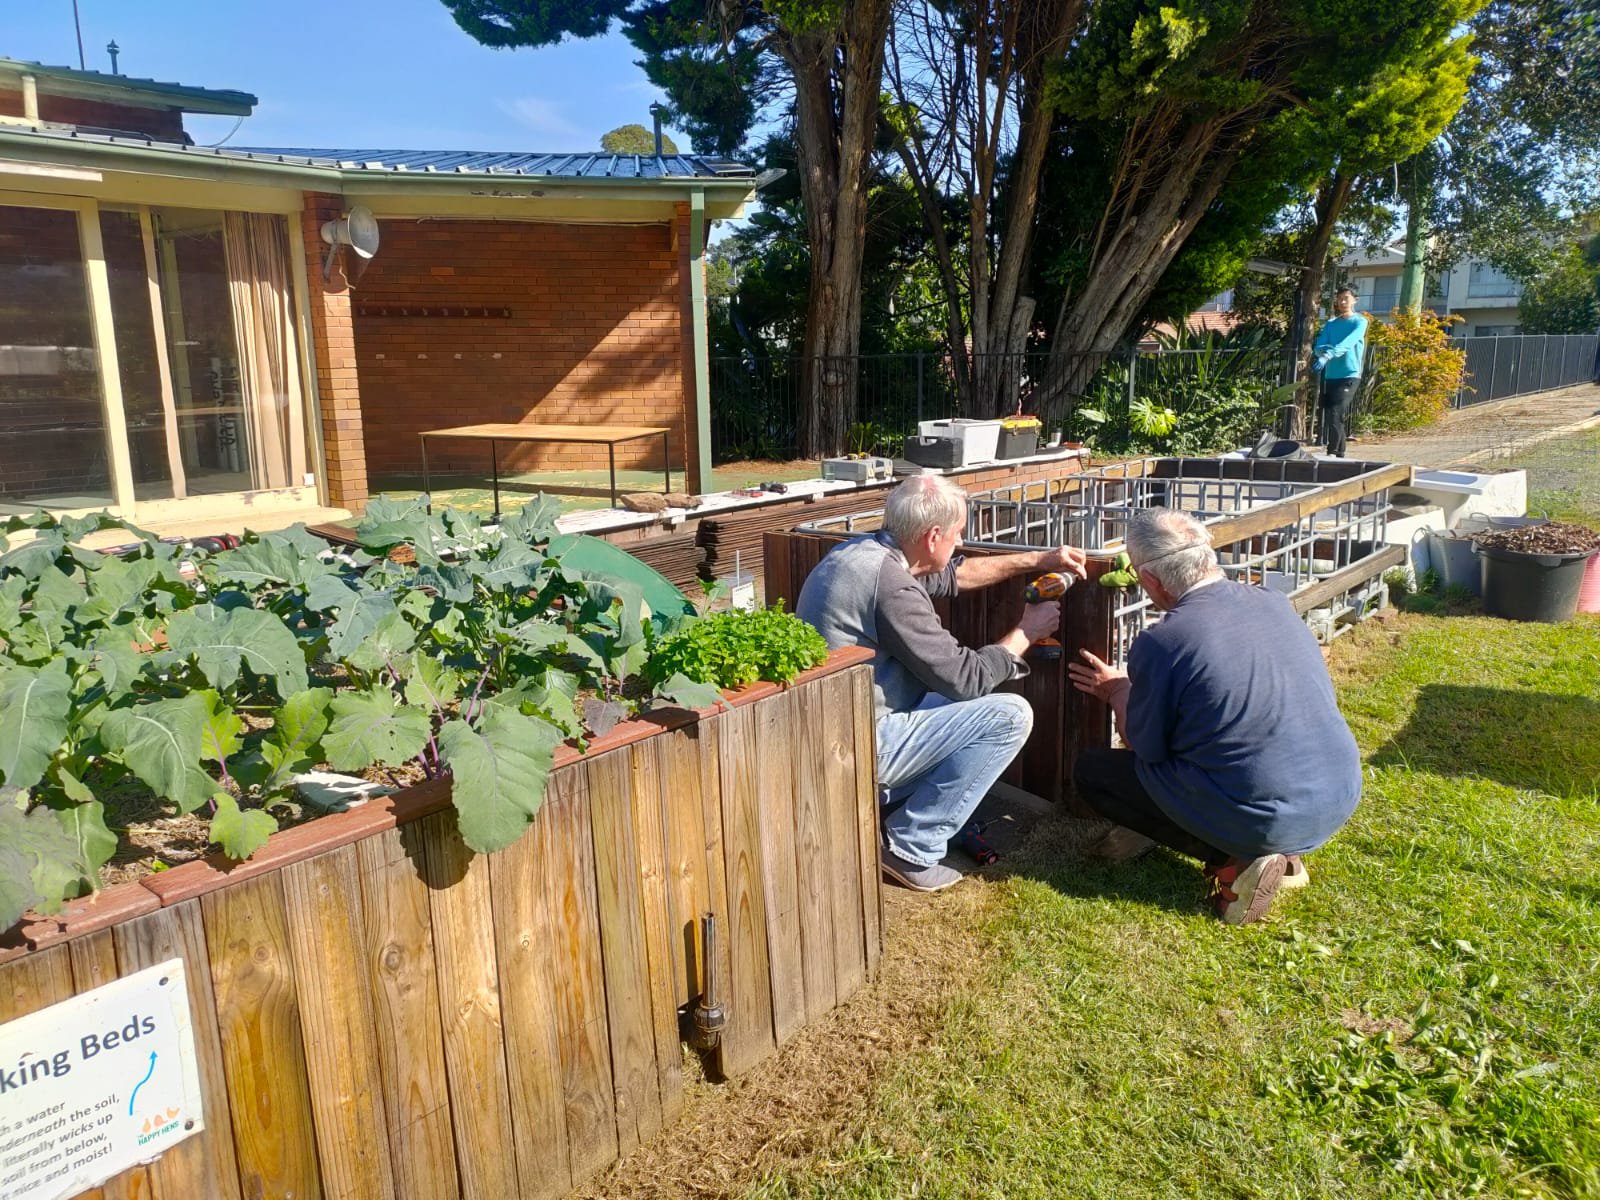 Thanks to our team of volunteers who built some new wicking beds last week. These are not only great because they need minimal watering, but also because they're wheel chair accessible. If you want to do some gardening in accessible beds, send us a m